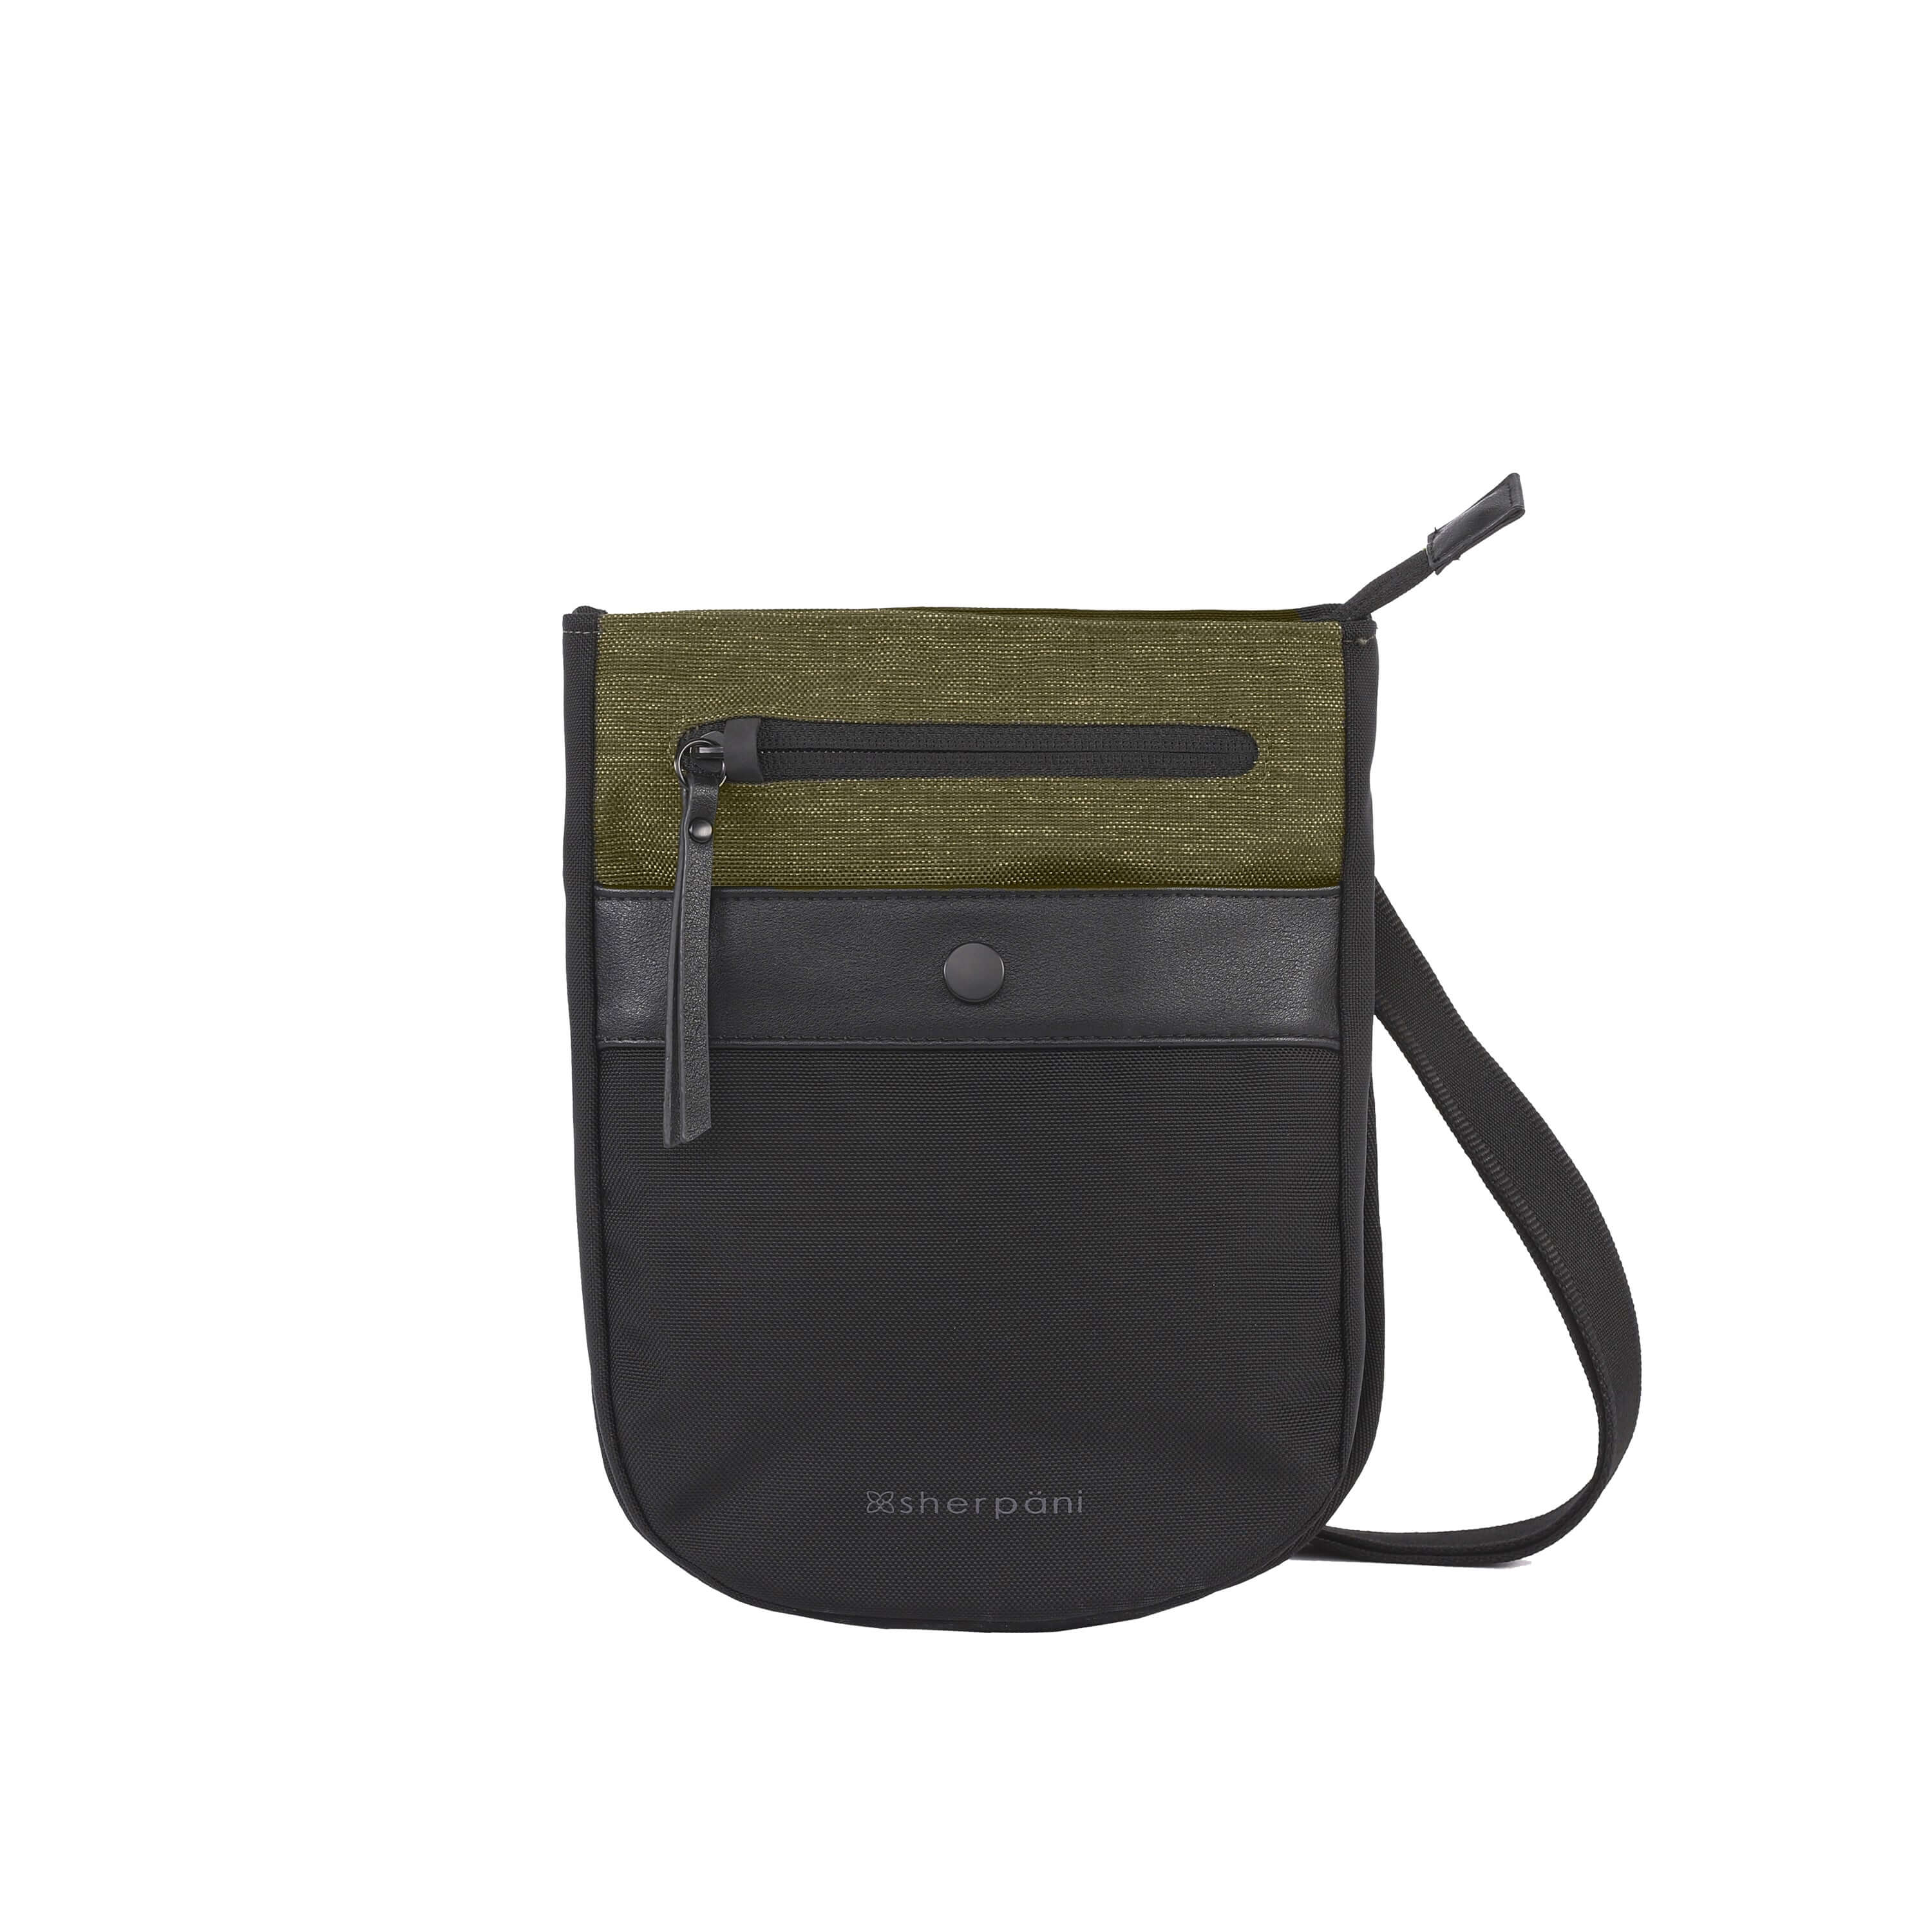 Flat front view of Sherpani’s Anti-Theft bag, the Prima AT in Loden, with vegan leather accents in black. There is an external pouch on the front of the bag that sits below a locking zipper compartment. The bag features an adjustable crossbody strap.